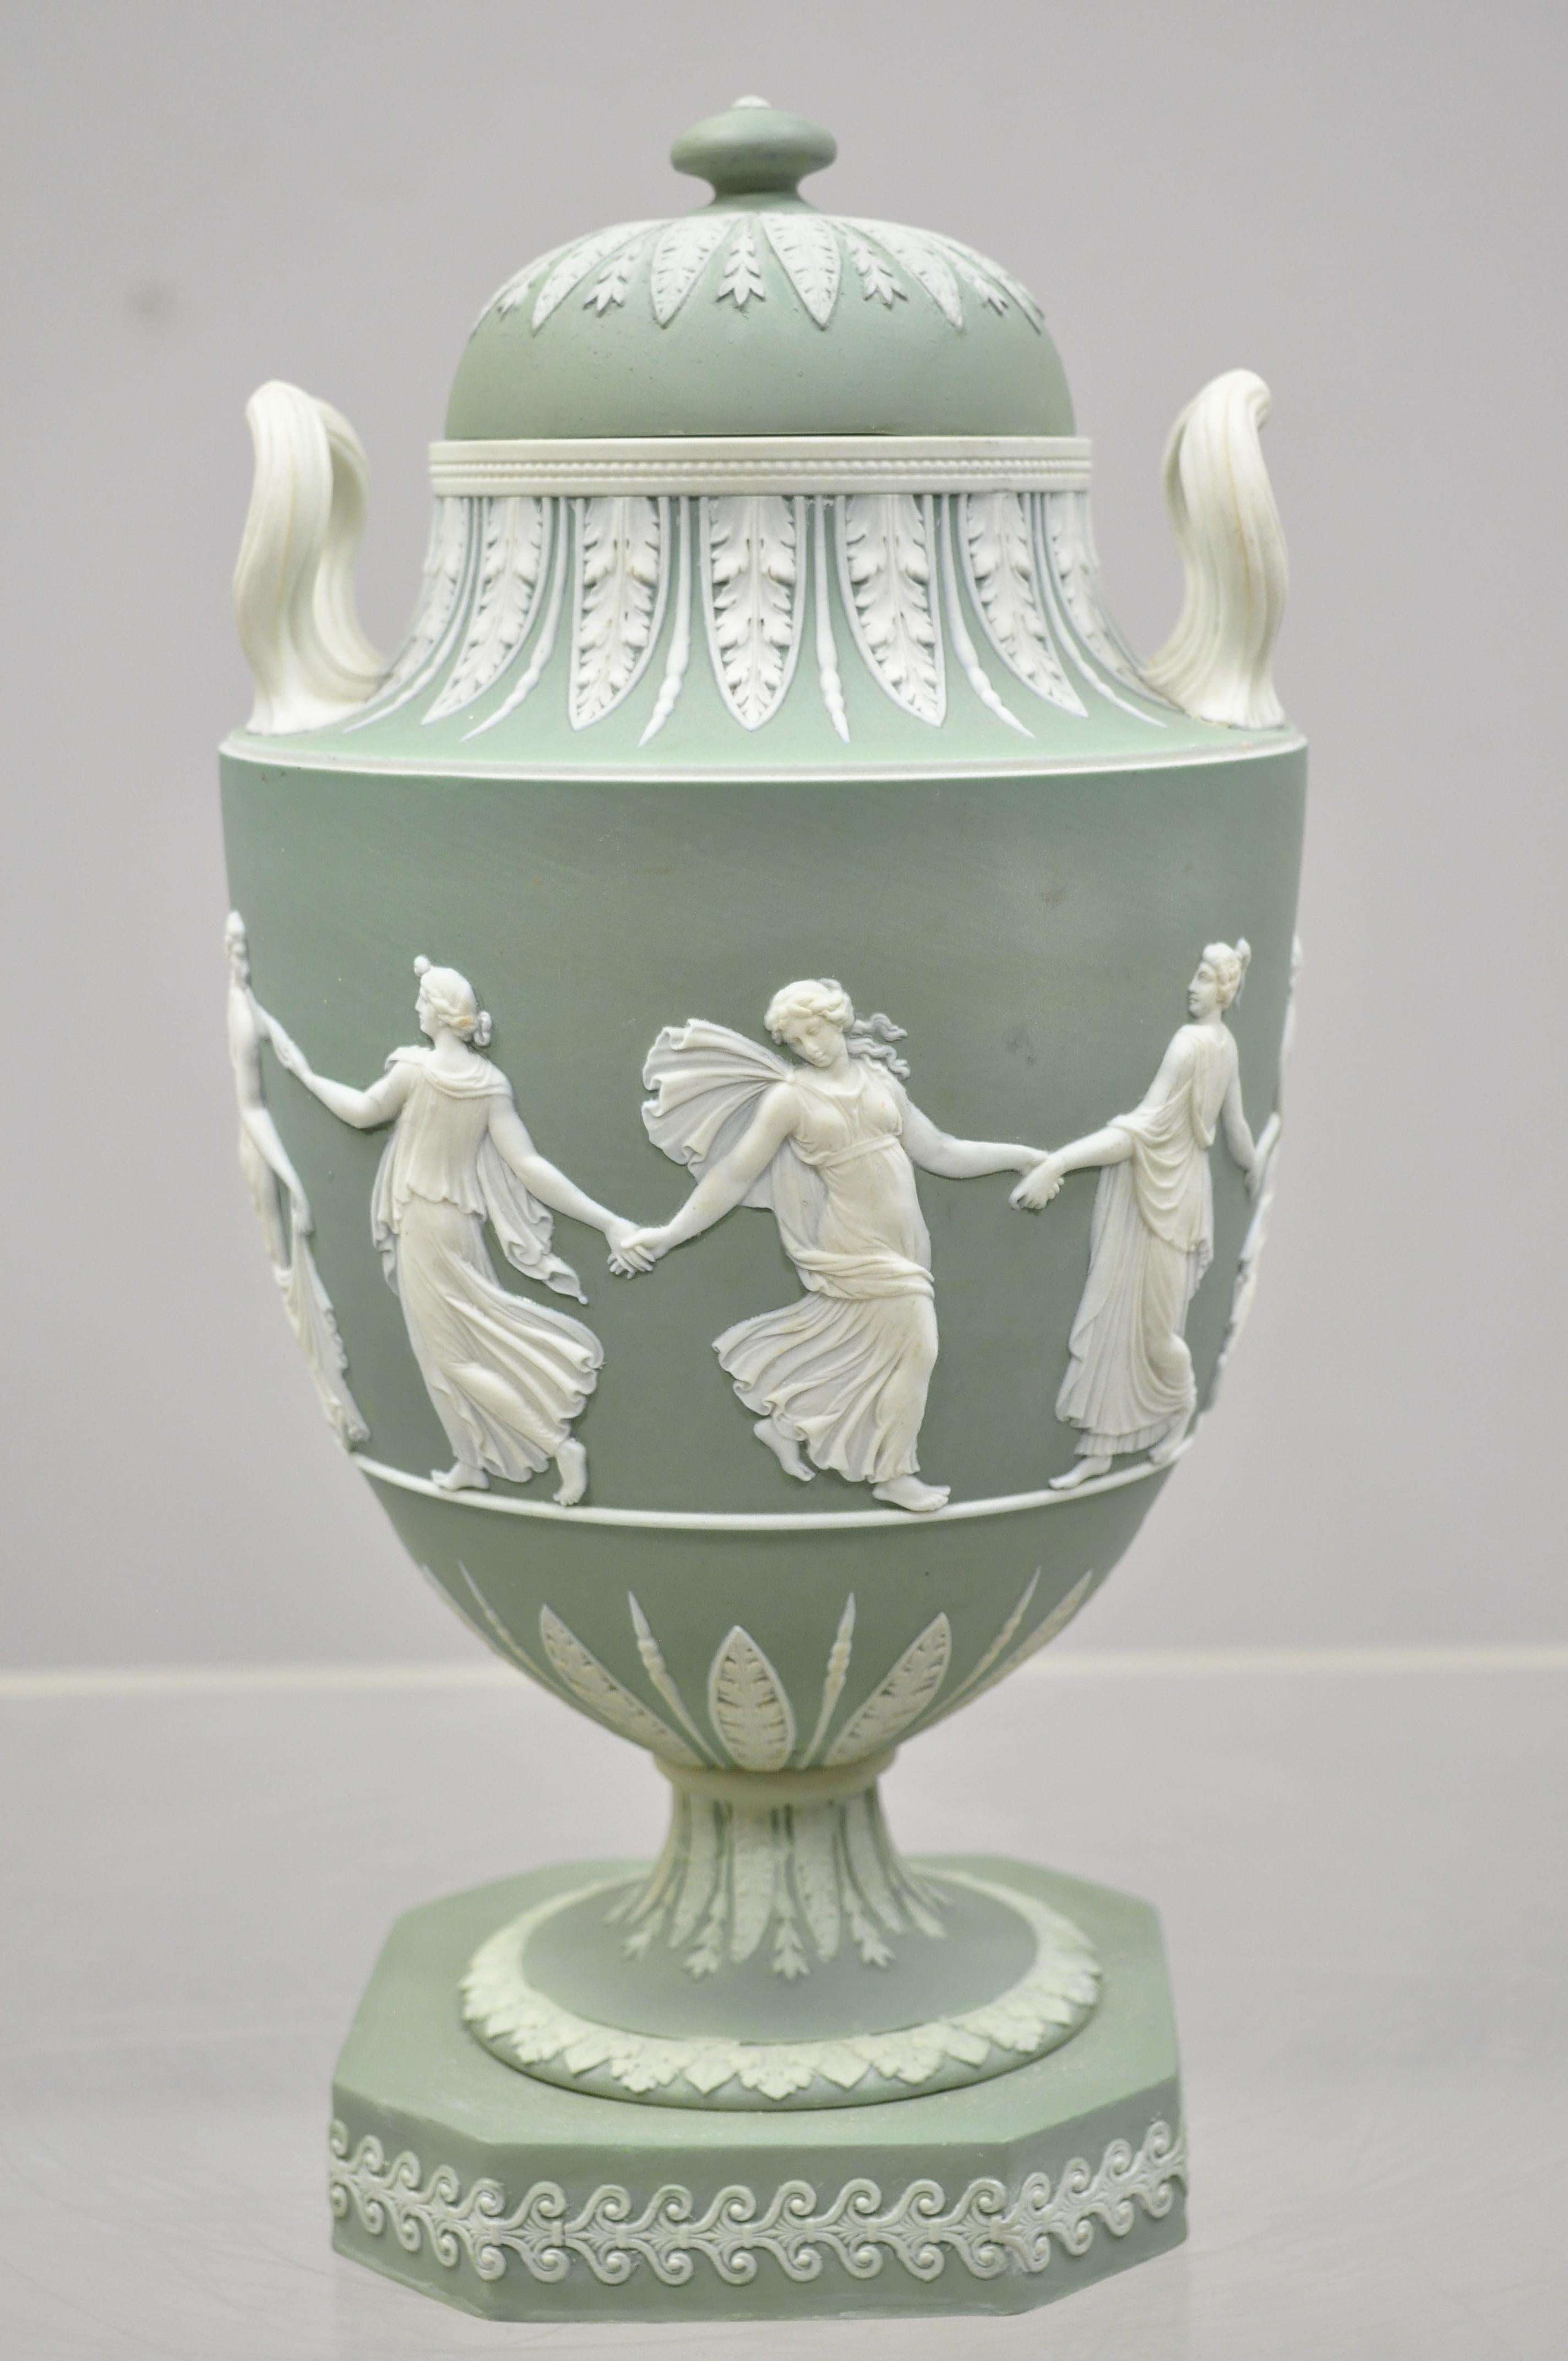 Wedgwood sage green lidded double handle urn vase with dancing figures, circa early 20th century. Measurements: 12.5